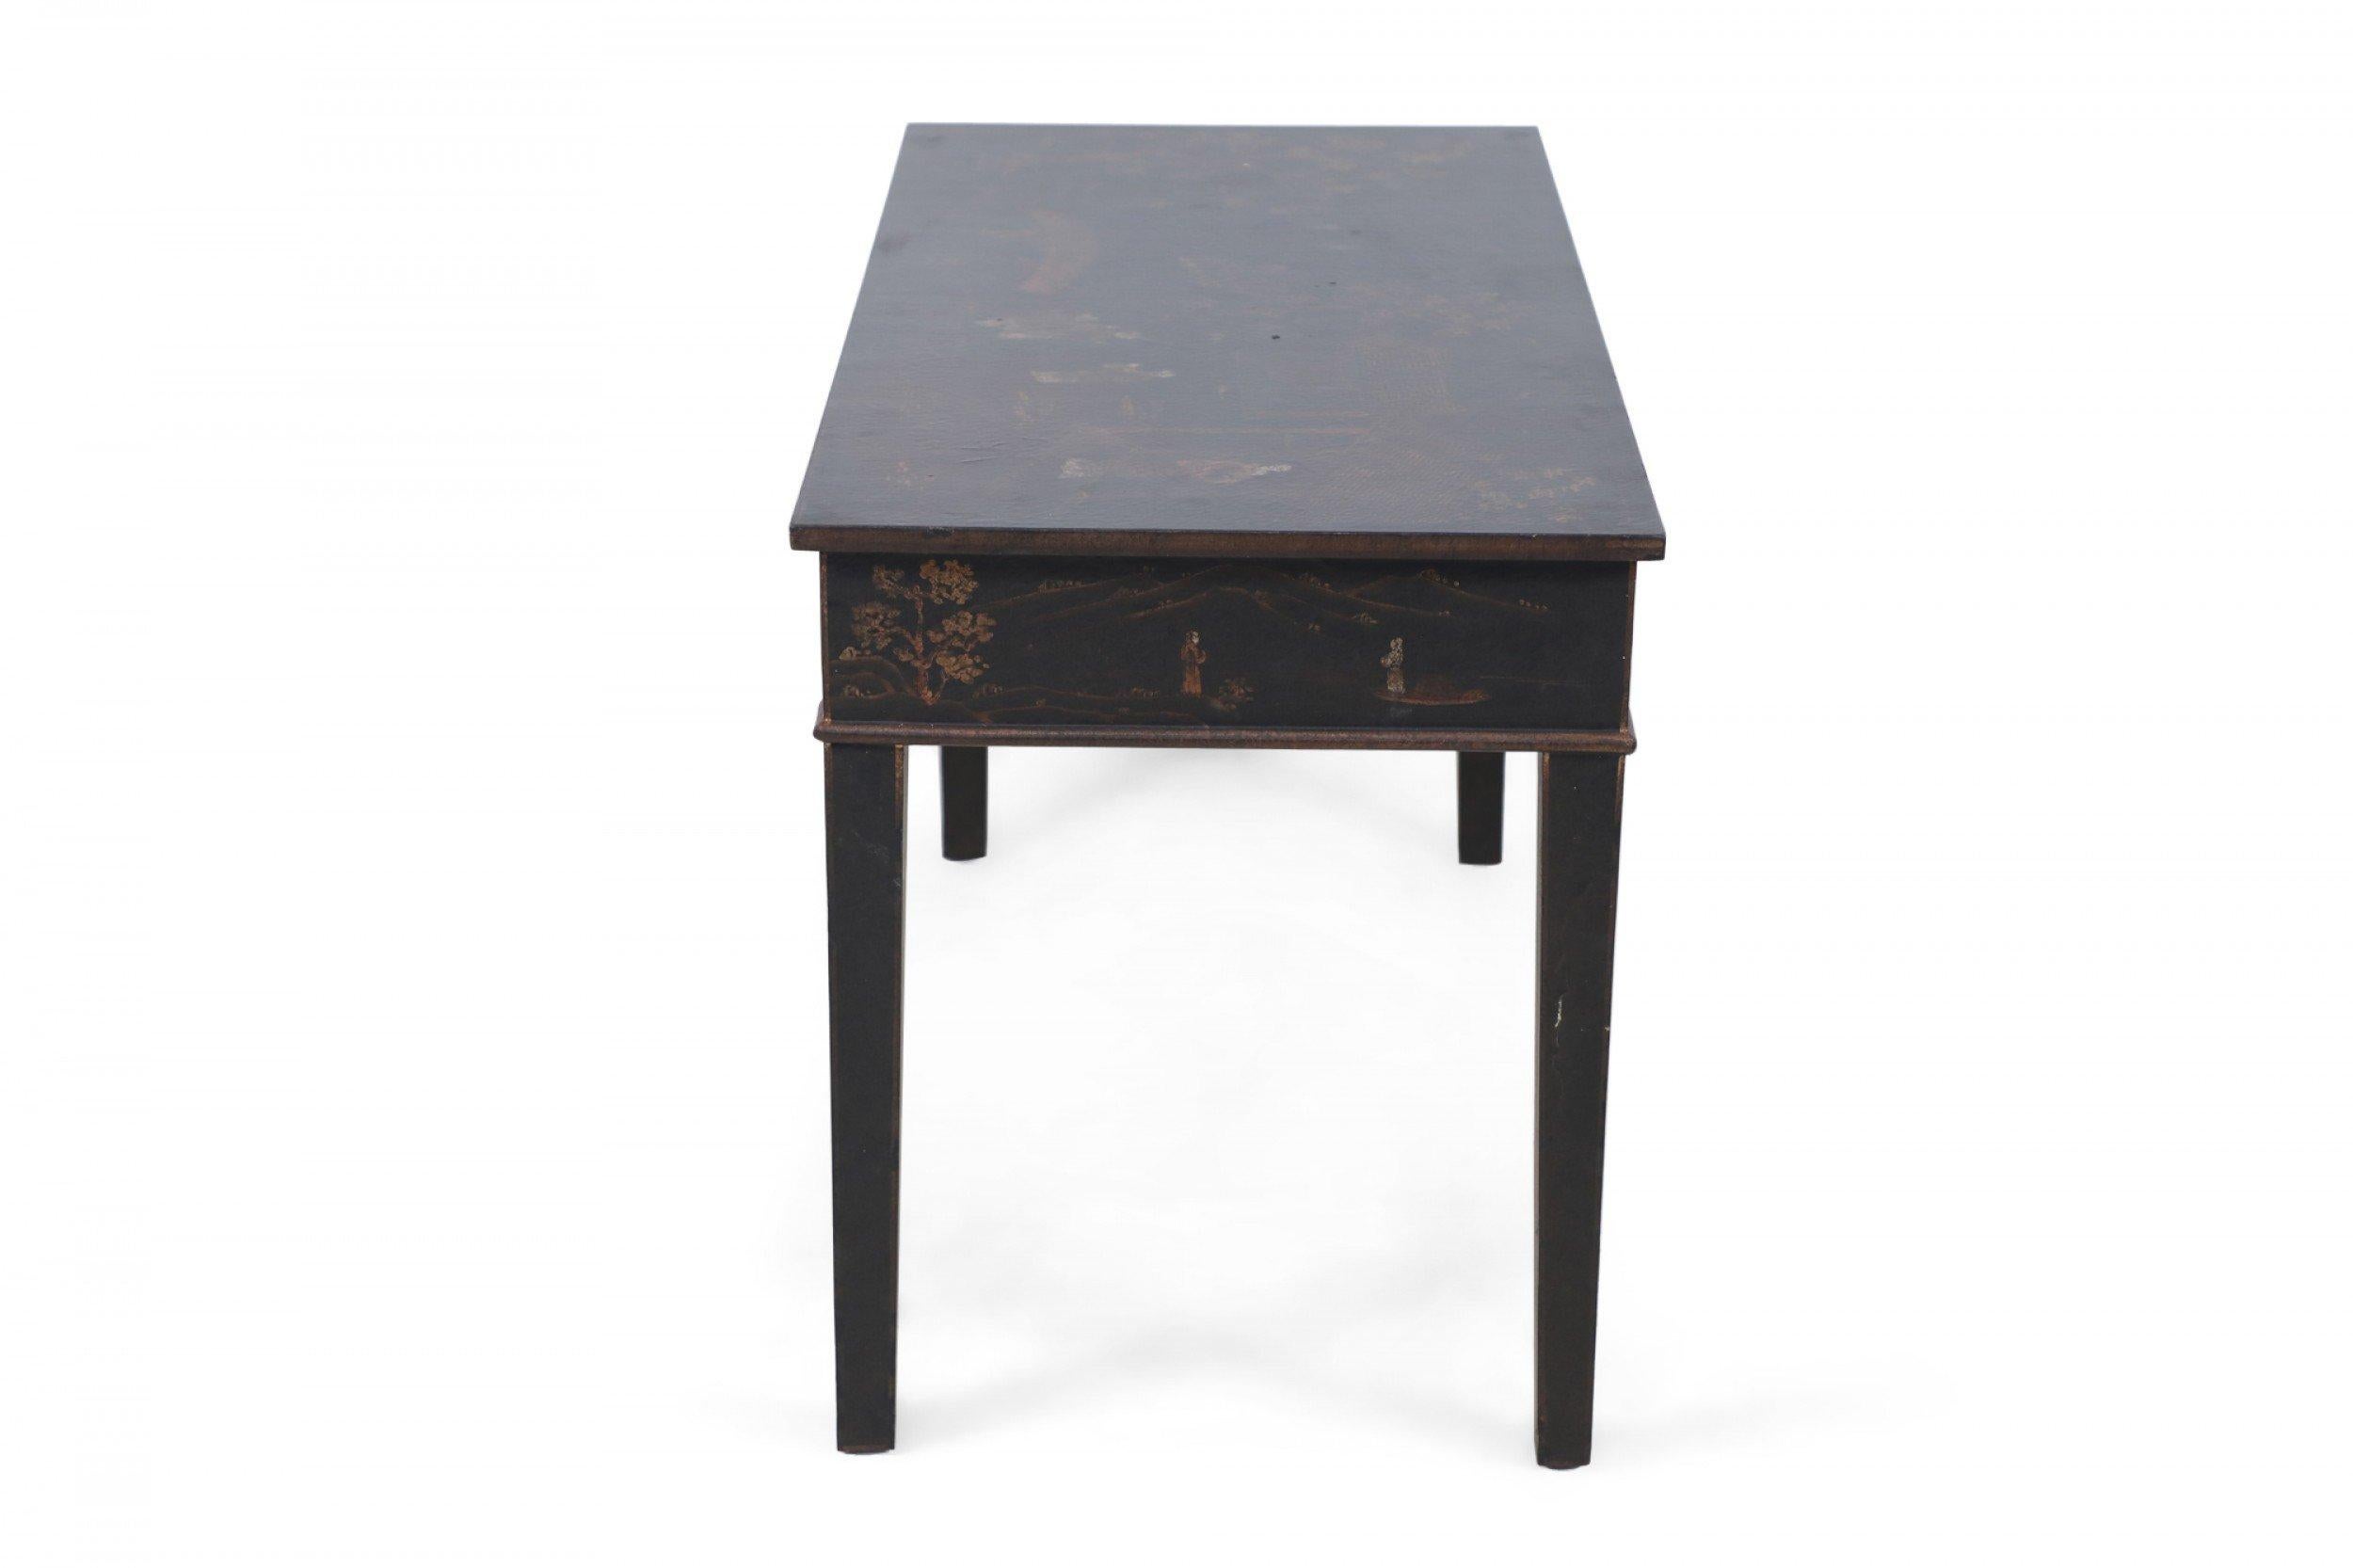 Chinese black writing desk painted with pastoral and figurative scenes on the top surface, sides and across two drawers on the front.